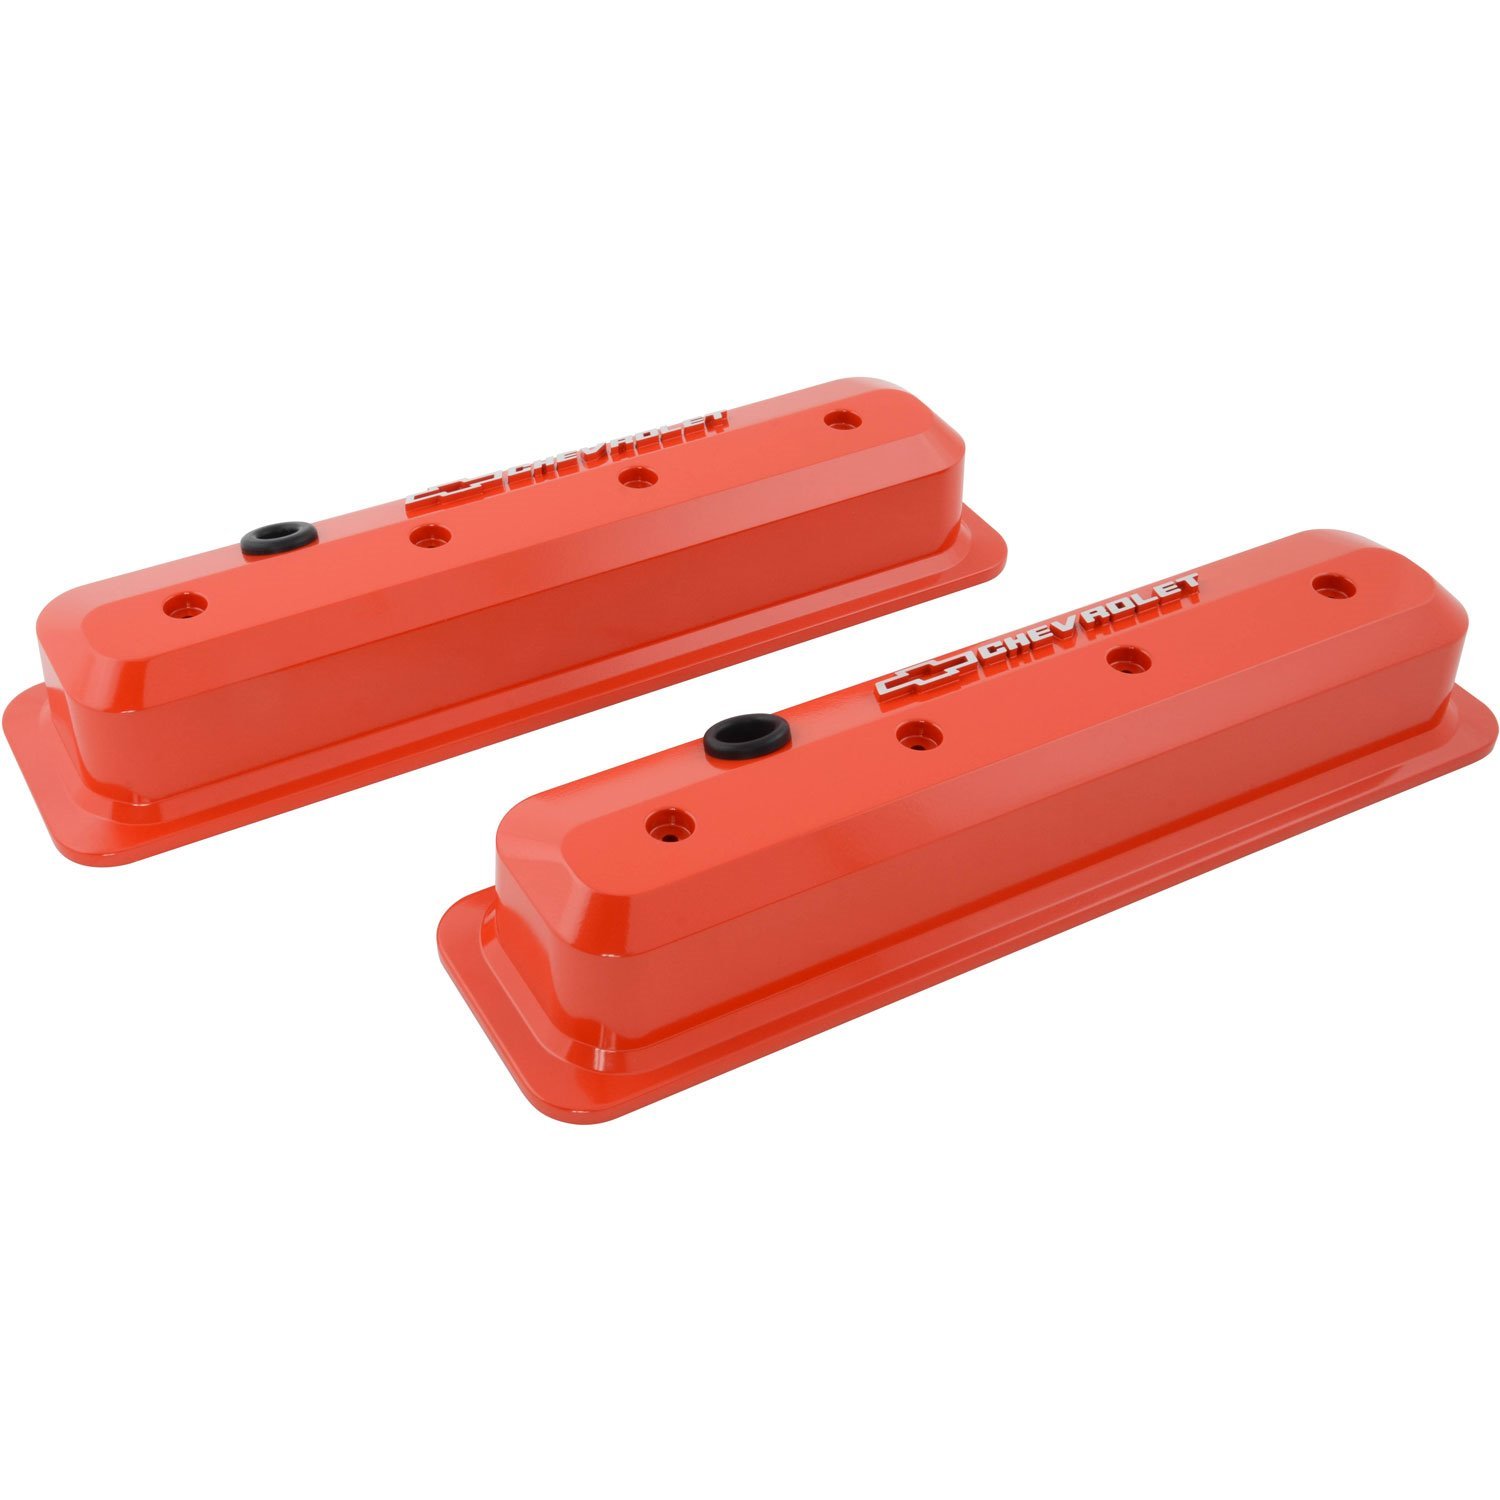 Die-Cast Slant-Edge Valve Covers for 1987-Up Small Block Chevy with Chevrolet/Bowtie Raised Emblem in Chevy Orange Finish